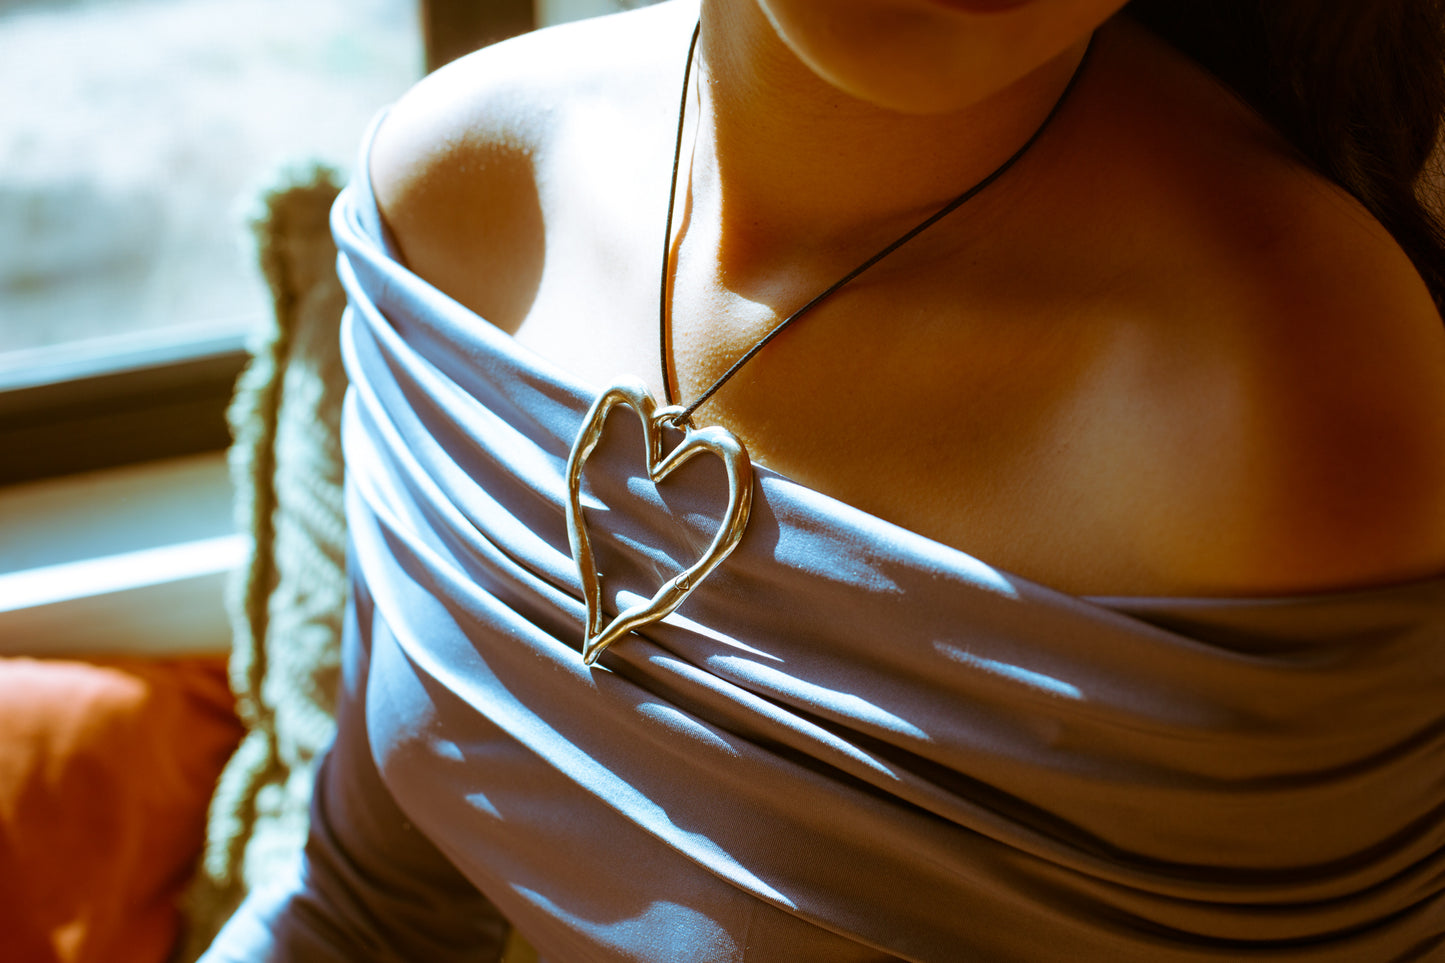 Electric Heart Necklace